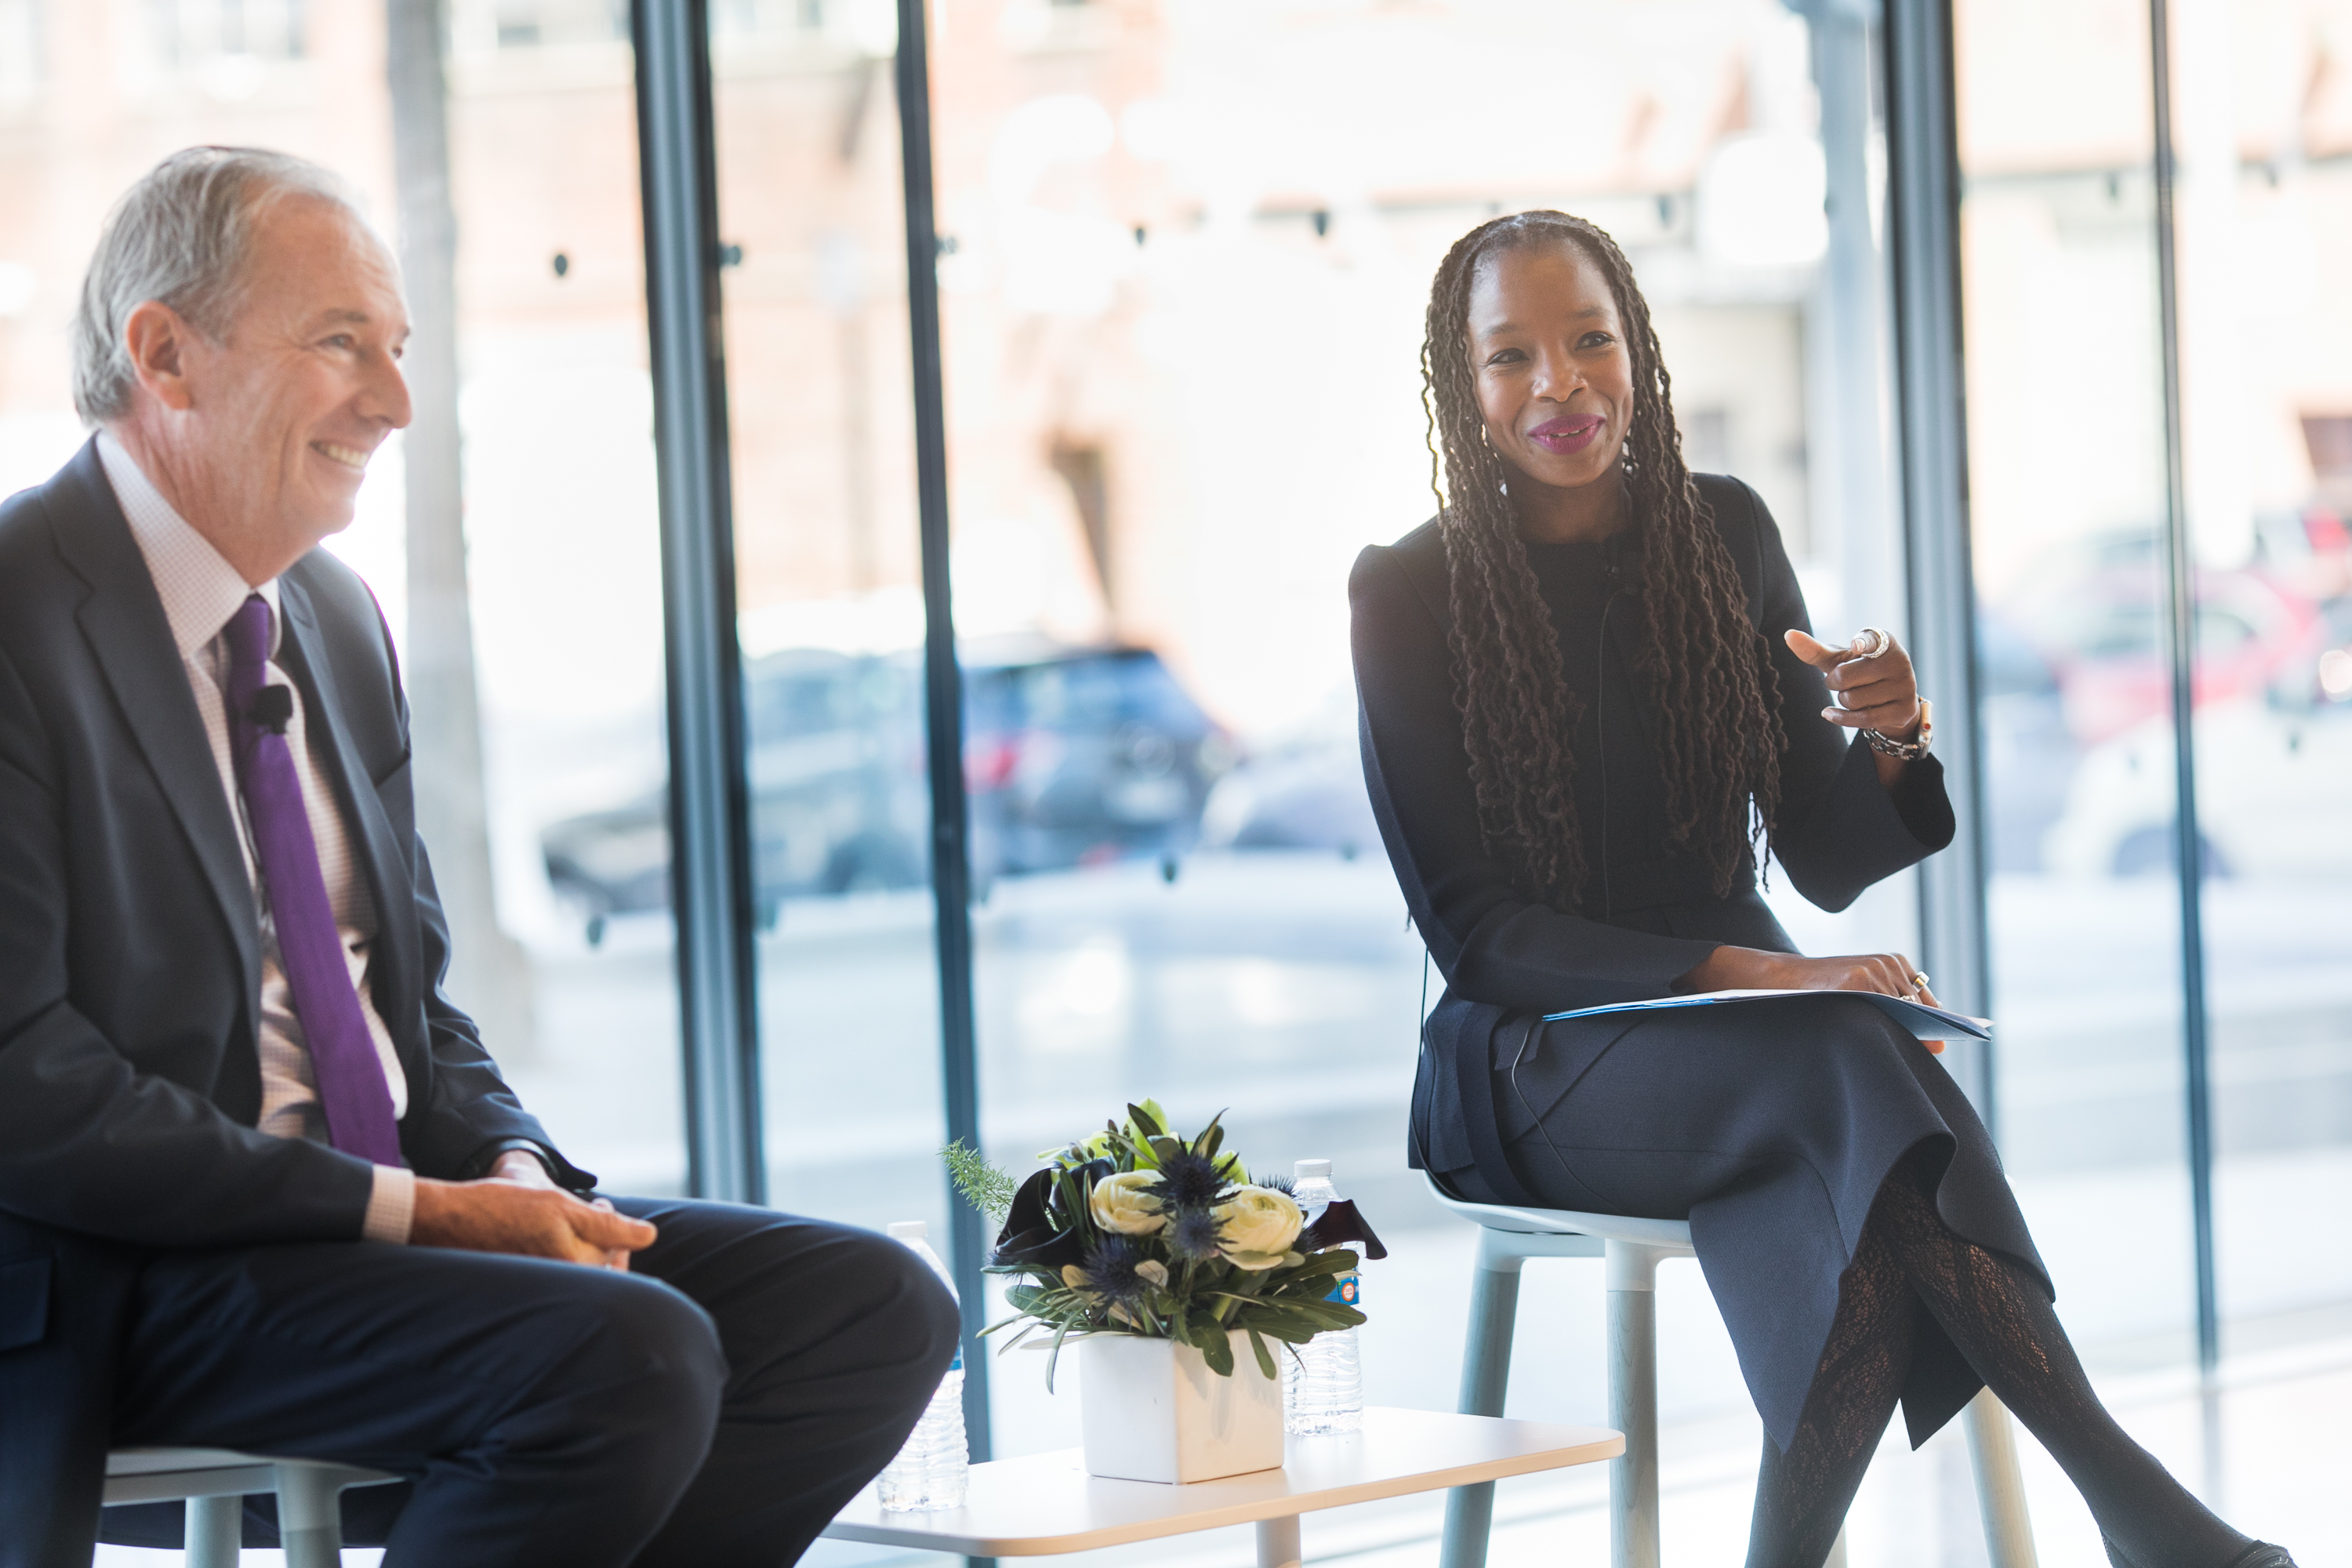 Modupe Akinola, associate professor of management, with James P. Gorman ’87, chairman and CEO of Morgan Stanley and chair of the Columbia Business School Board, discussing “Diversity, Equity, and Inclusion as a Core Organizational Value” at Reunion 2022.